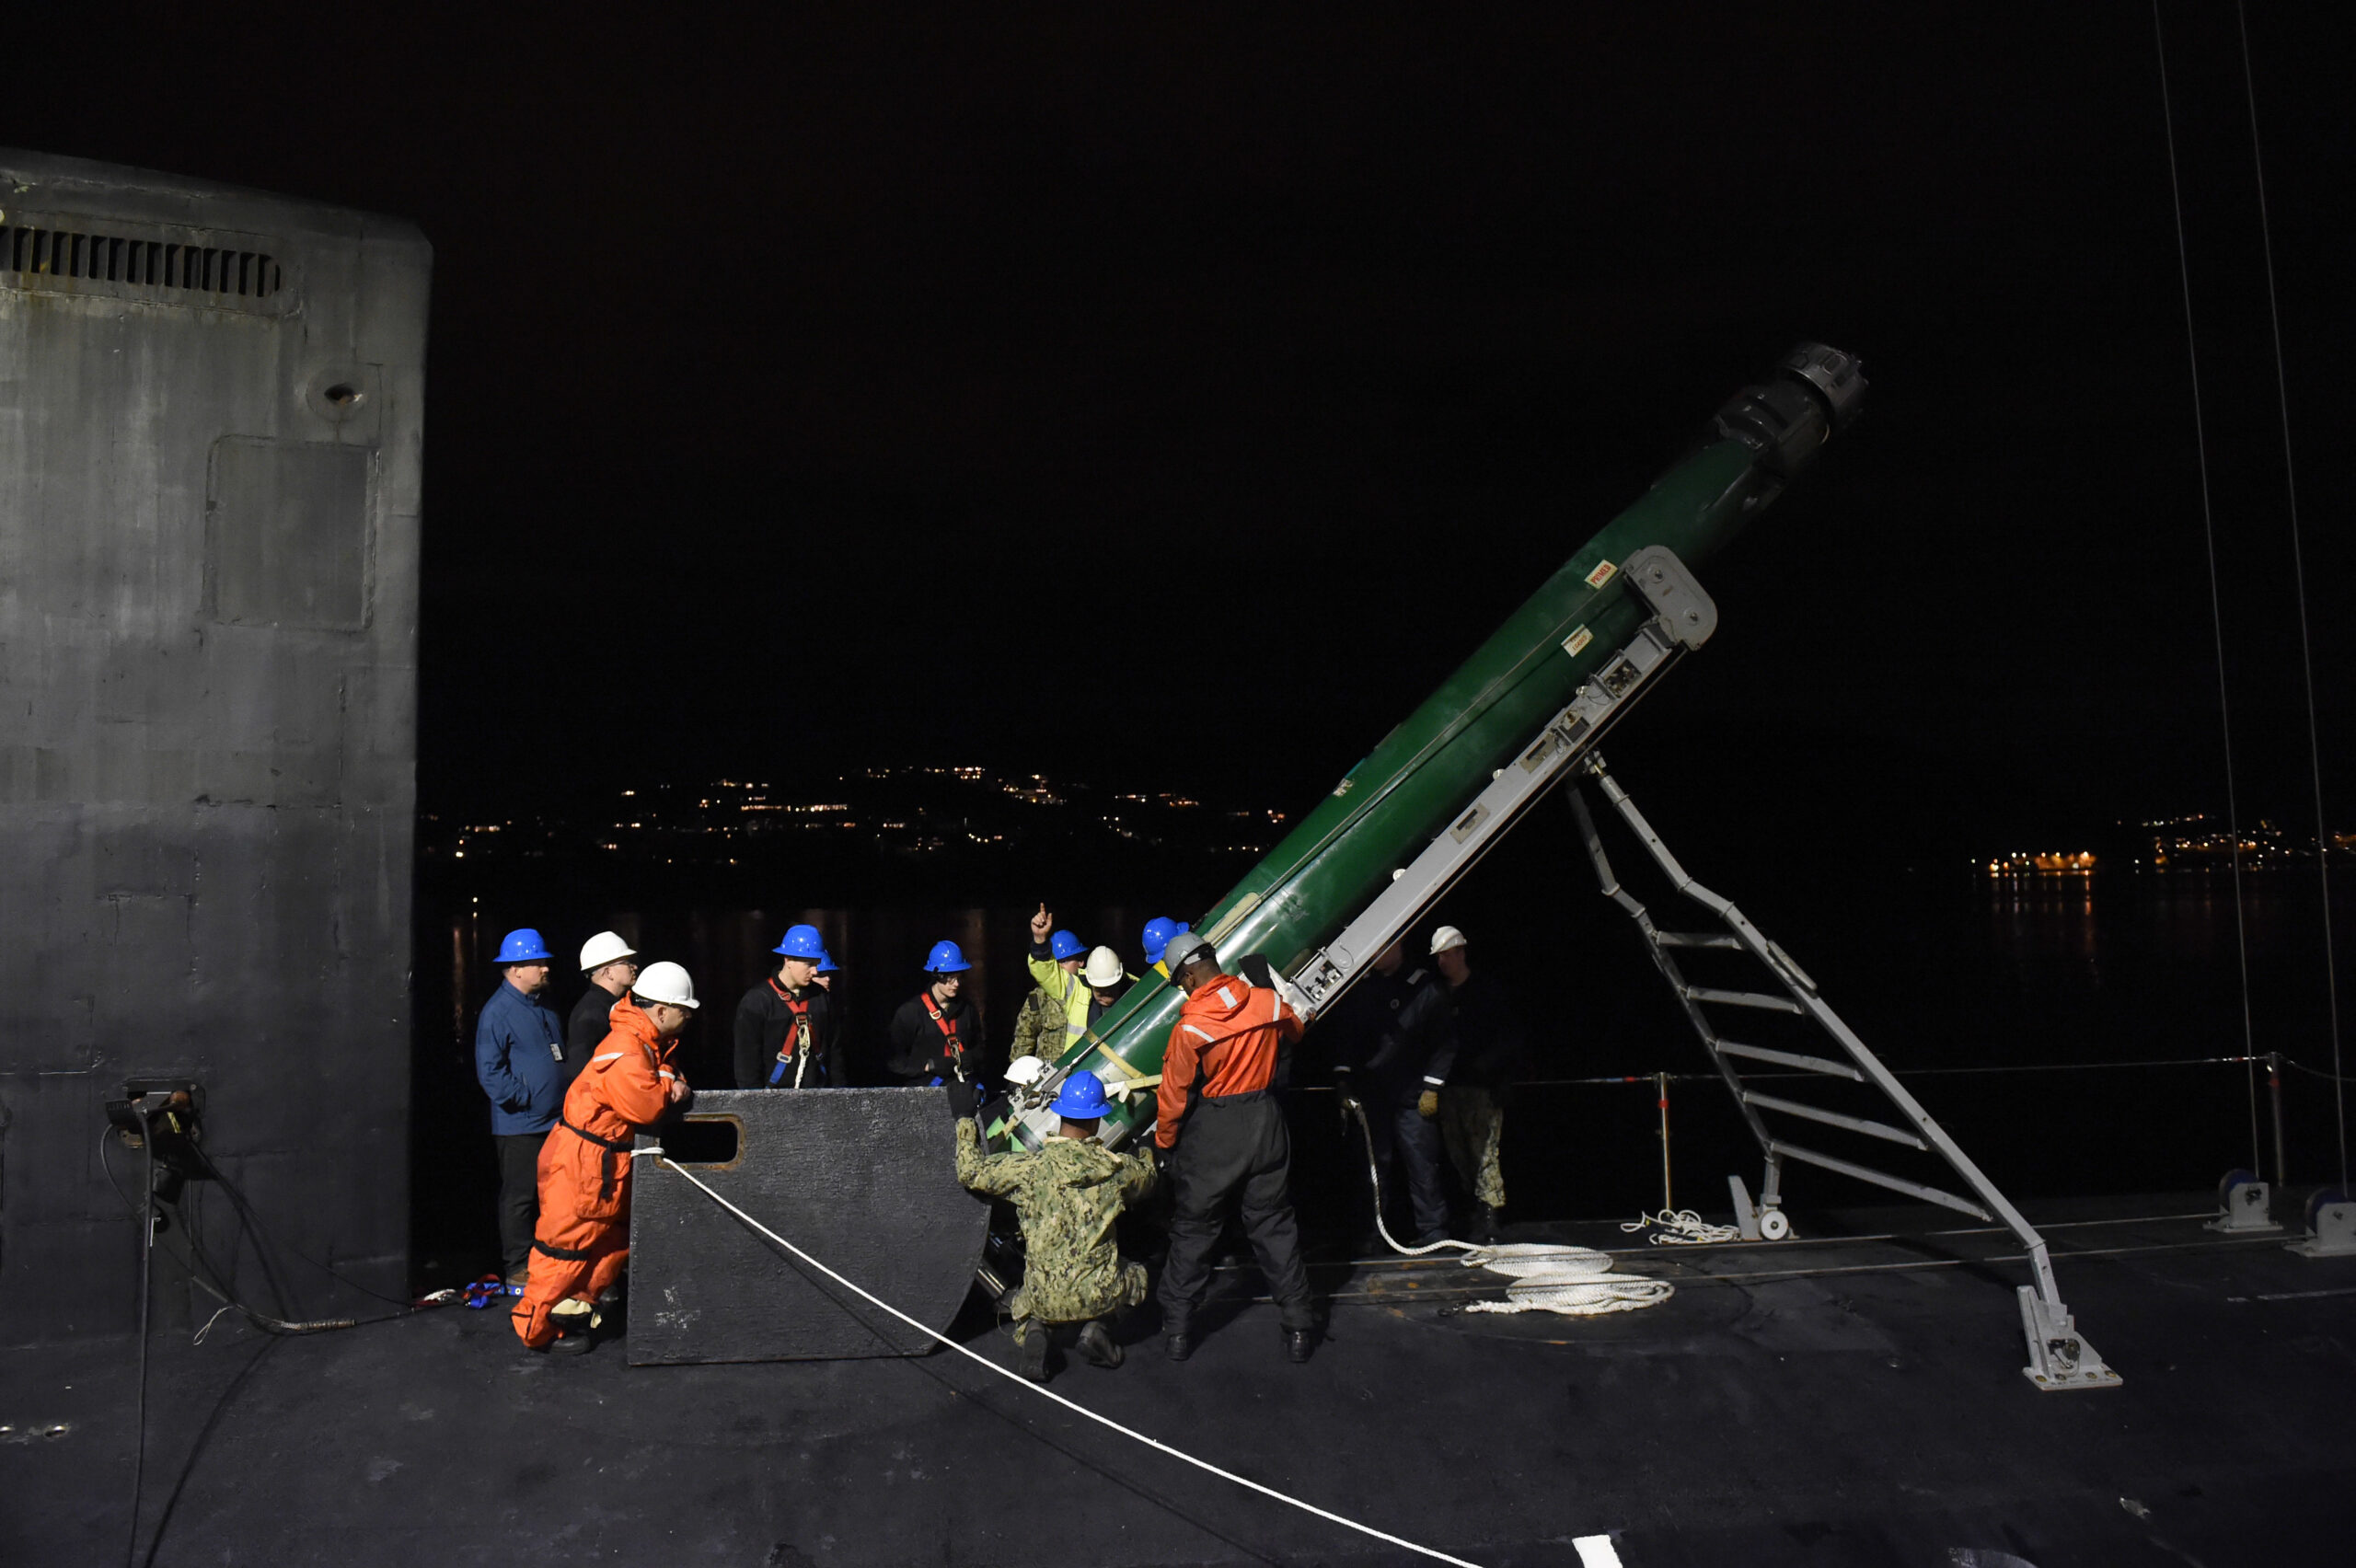 191018-N-UN744-1259 - HAAKONSVERN NAVAL BASE, Norway (Oct. 18, 2019) - Sailors assigned to the Virginia-class, nuclear-powered, fast-attack submarine USS Minnesota (SSN 783) work alongside Norwegian crane operators to guide an MK-48 Advanced Capability torpedo into the submarine during an ordnance onload at the Haakonsvern Naval Base in Bergen, Norway, Oct. 18, 2019. Minnesota, the 10th ship of the Virginia class, is on a regularly scheduled deployment in the U.S. 6th Fleet area of operations in support of U.S. national security interests in Europe and Africa. (U.S. Navy photo by Chief Mass Communication Specialist Travis Simmons)